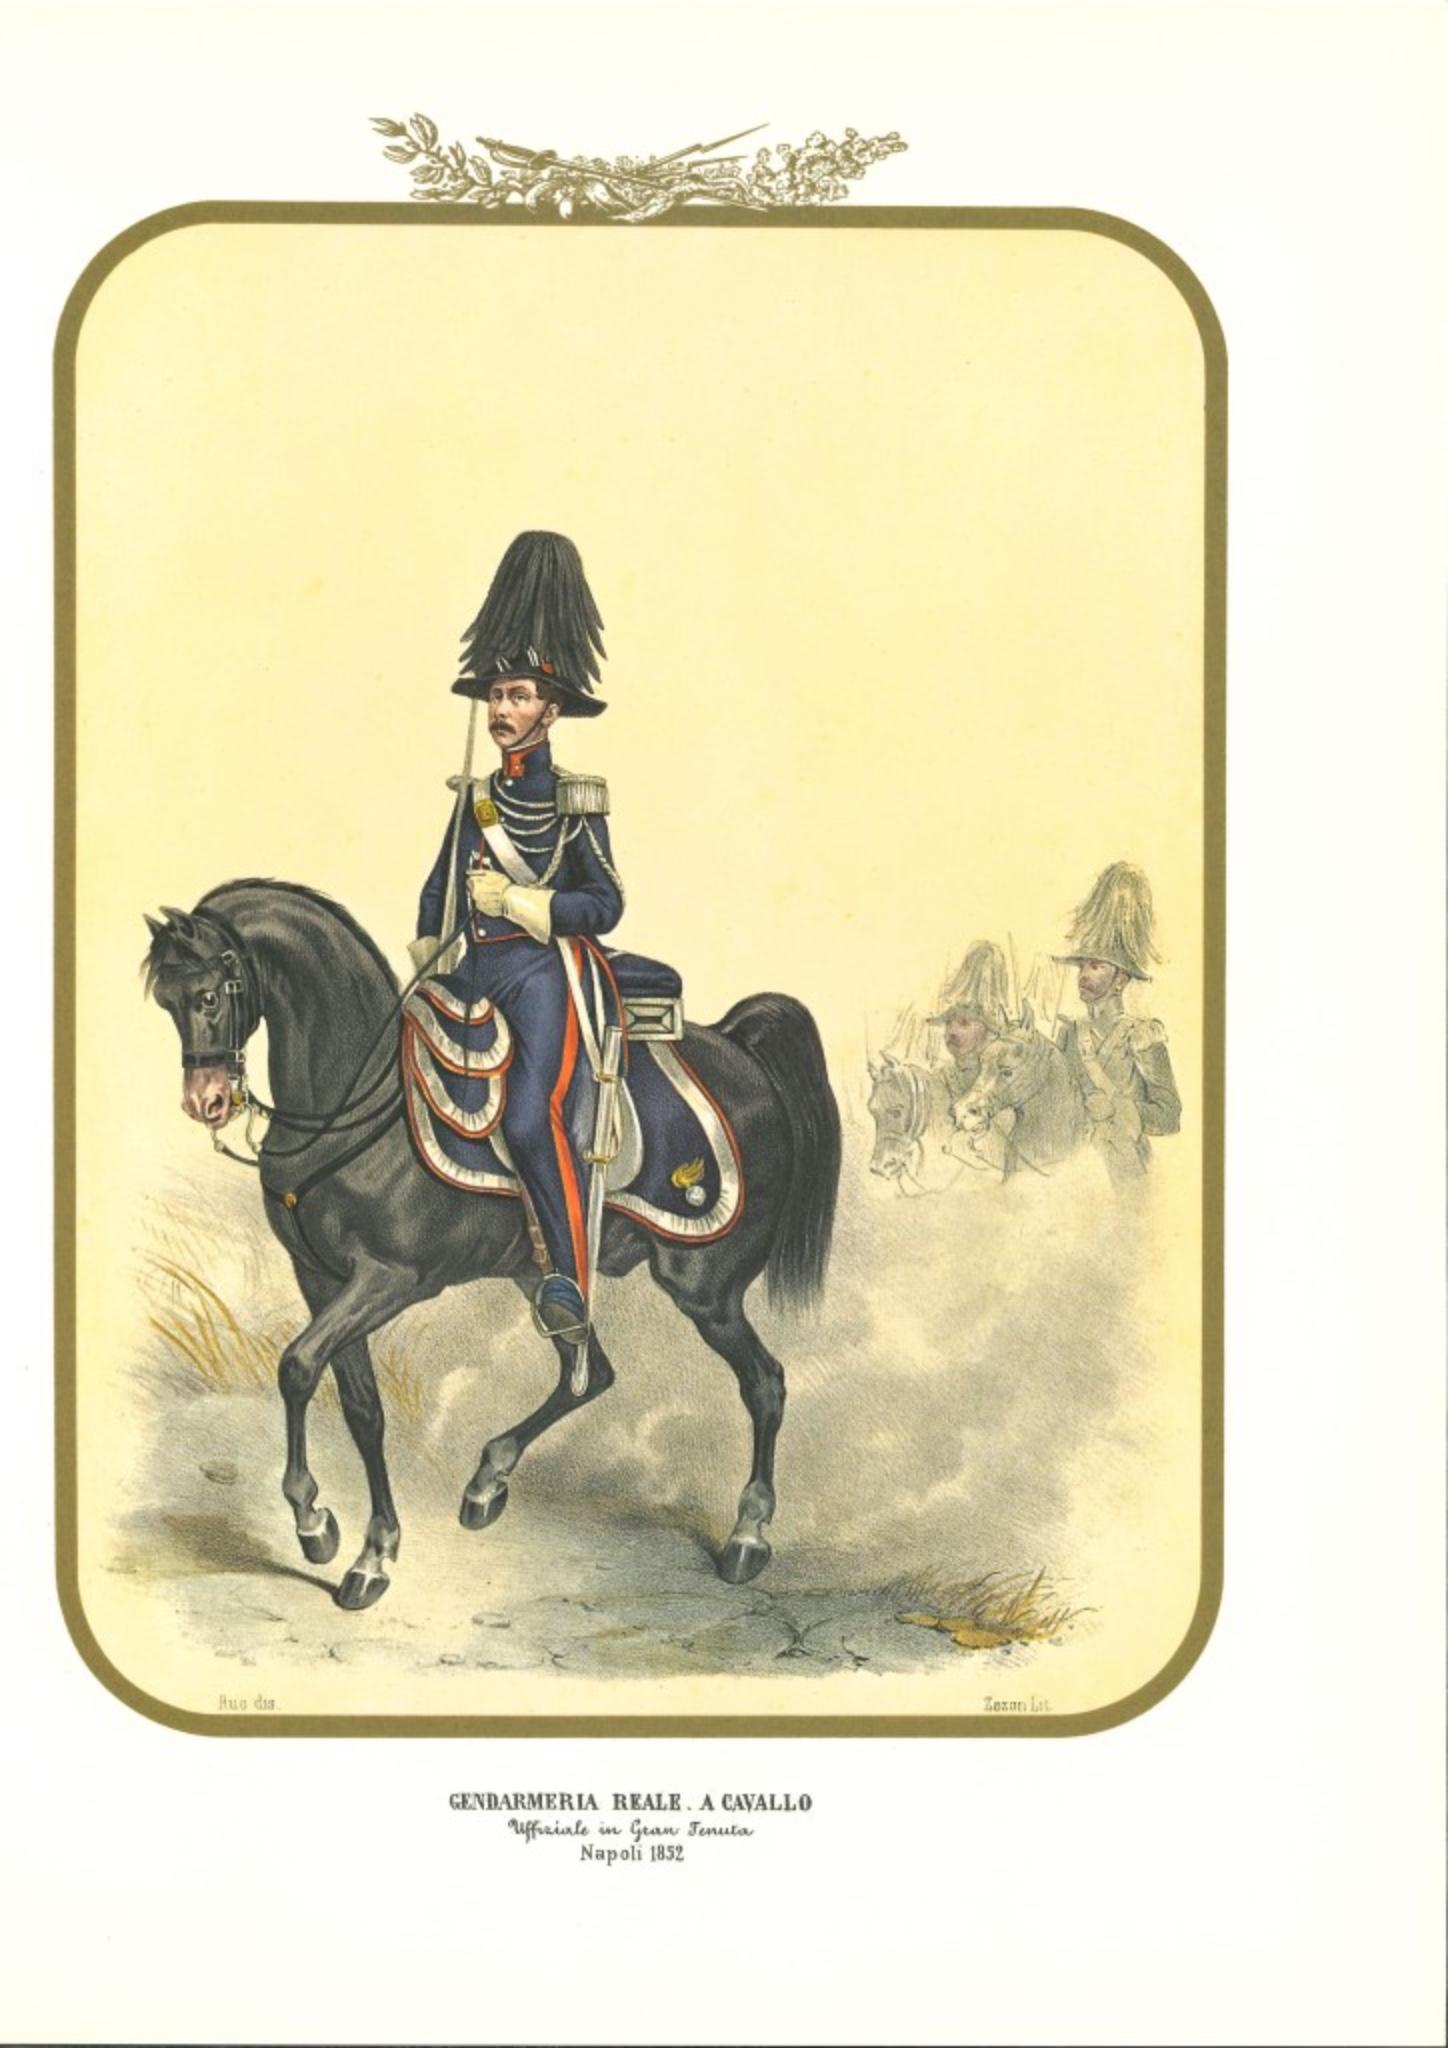 Royal Gendarmerie on horseback is a lithograph by Antonio Zezon. Naples 1852.

Interesting colored lithograph which describes an Officer of the Royal Gendarmerie riding his horse.

In excellent condition, this print belongs to one of the most famous